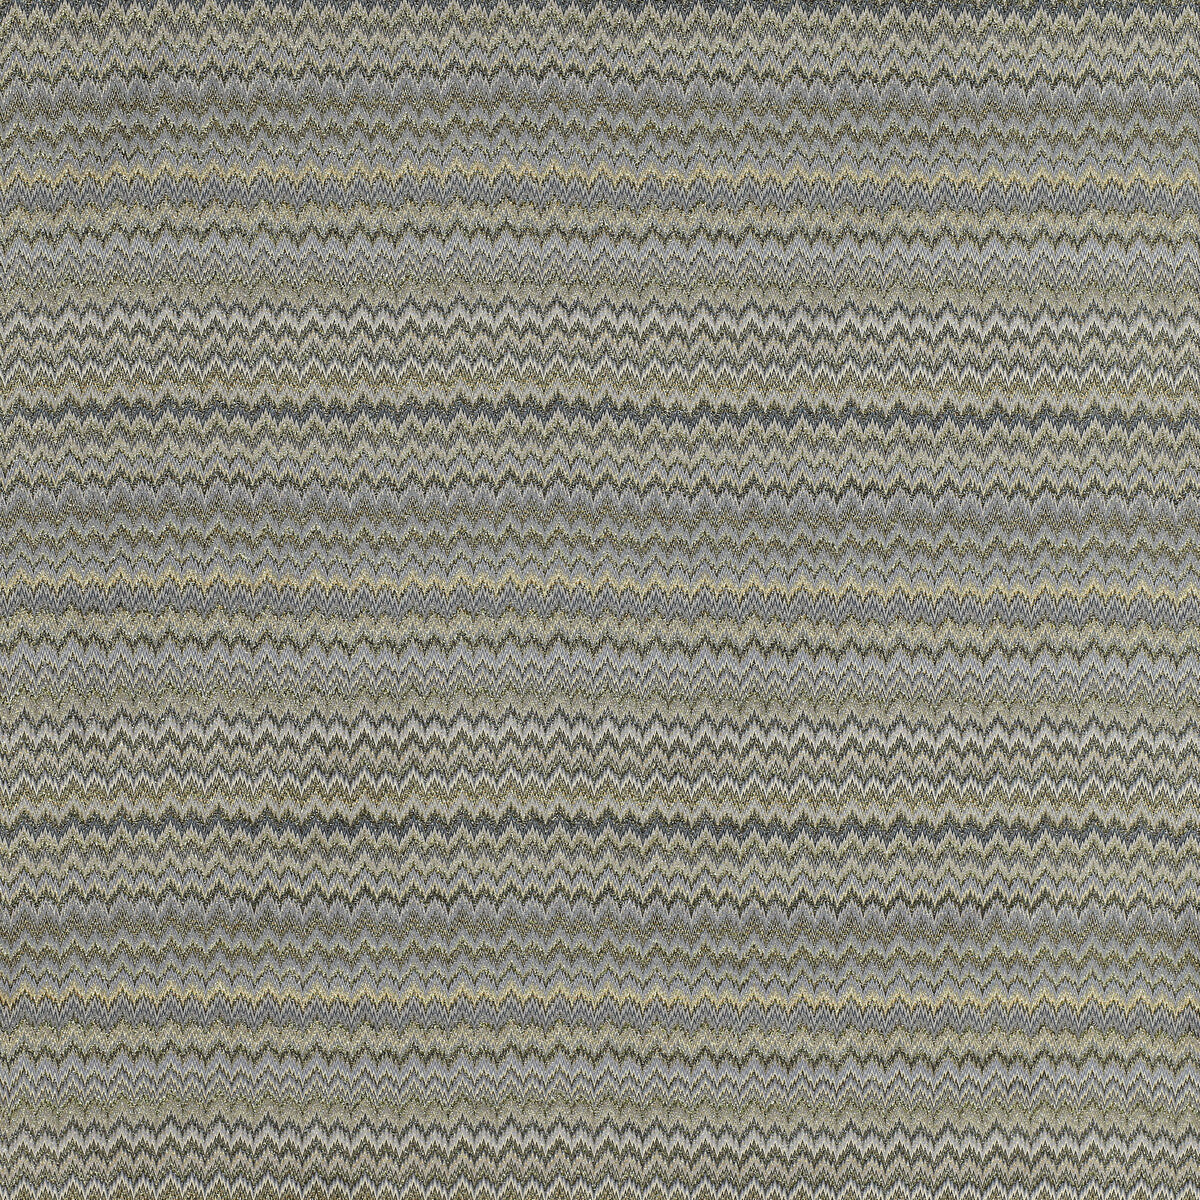 Plaisir fabric in 170 color - pattern 36184.523.0 - by Kravet Couture in the Missoni Home collection